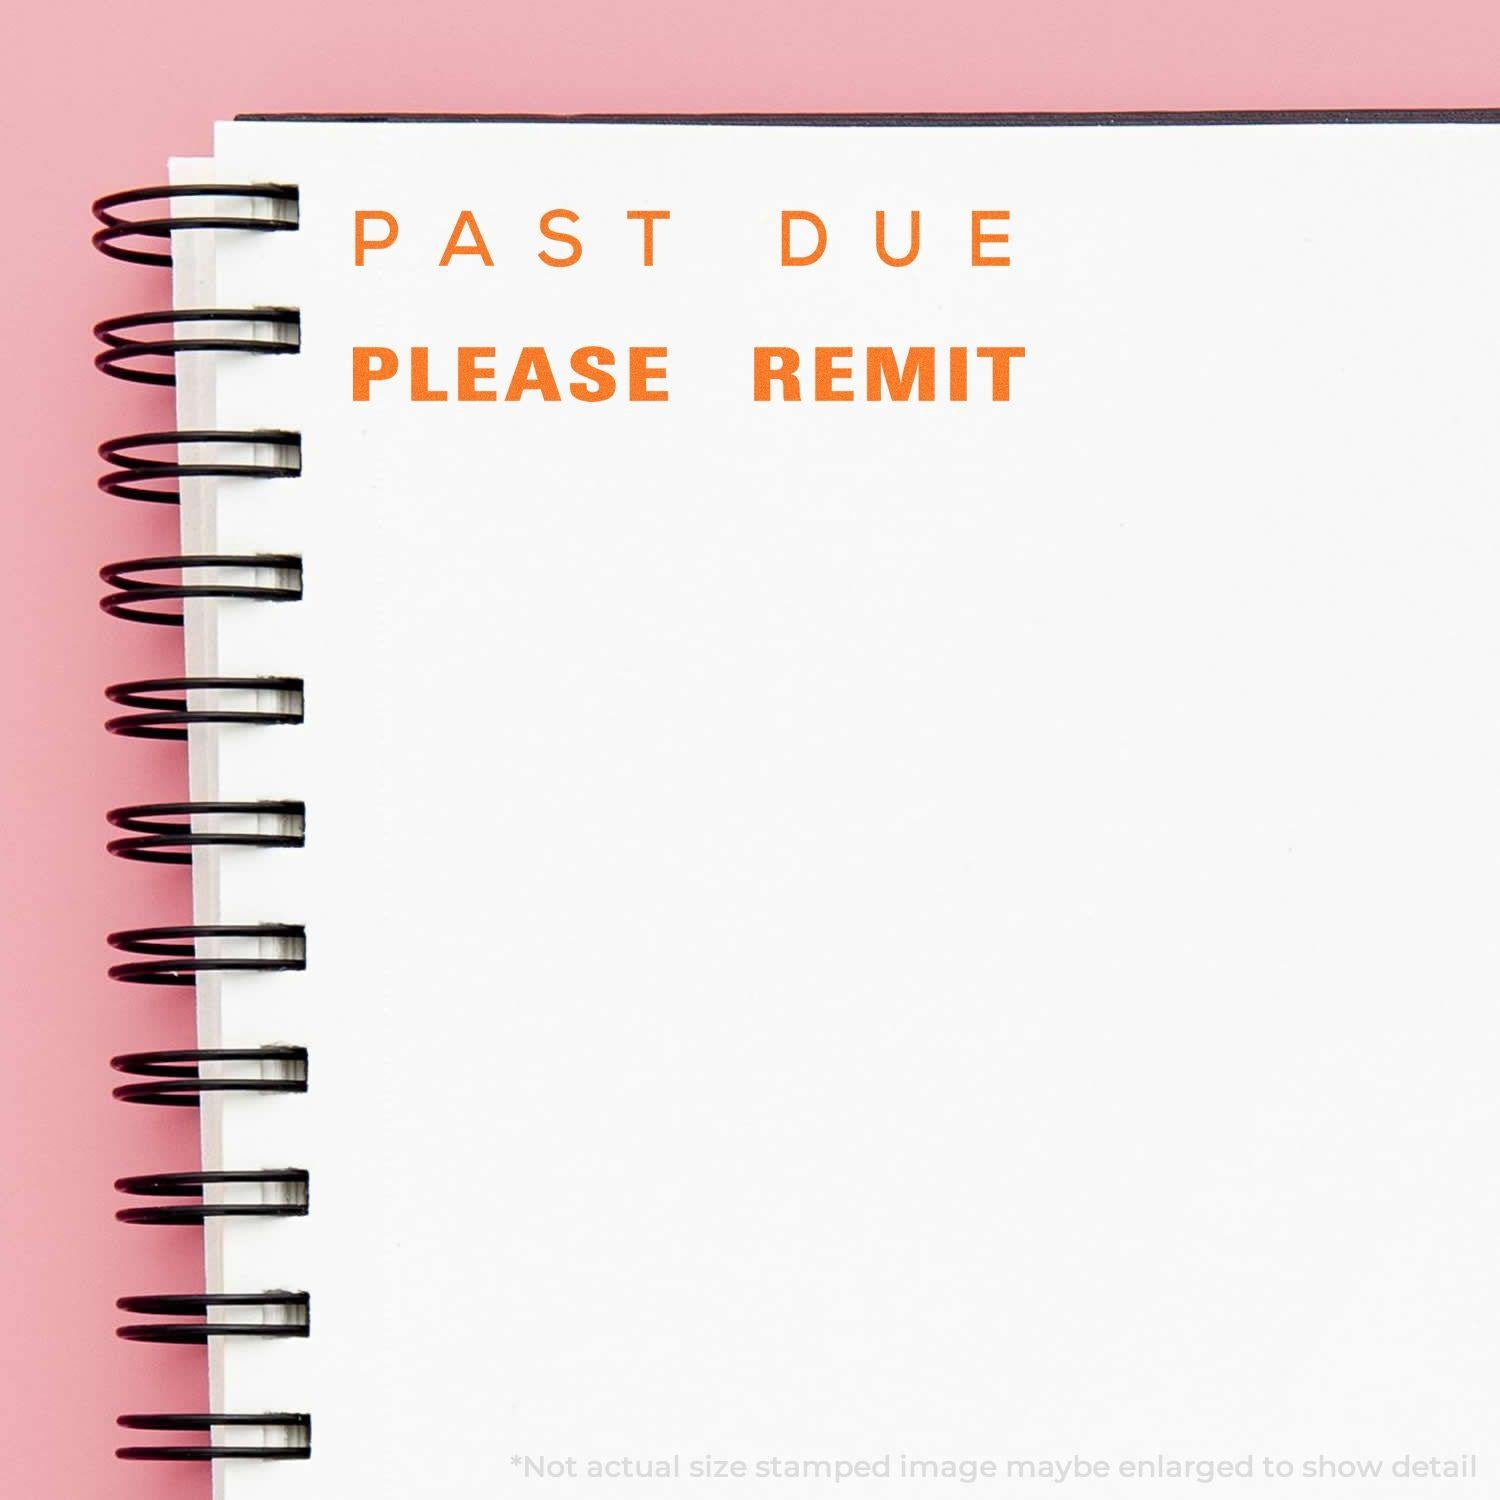 A stock office rubber stamp with a stamped image showing how the text "PAST DUE PLEASE REMIT" is displayed after stamping.